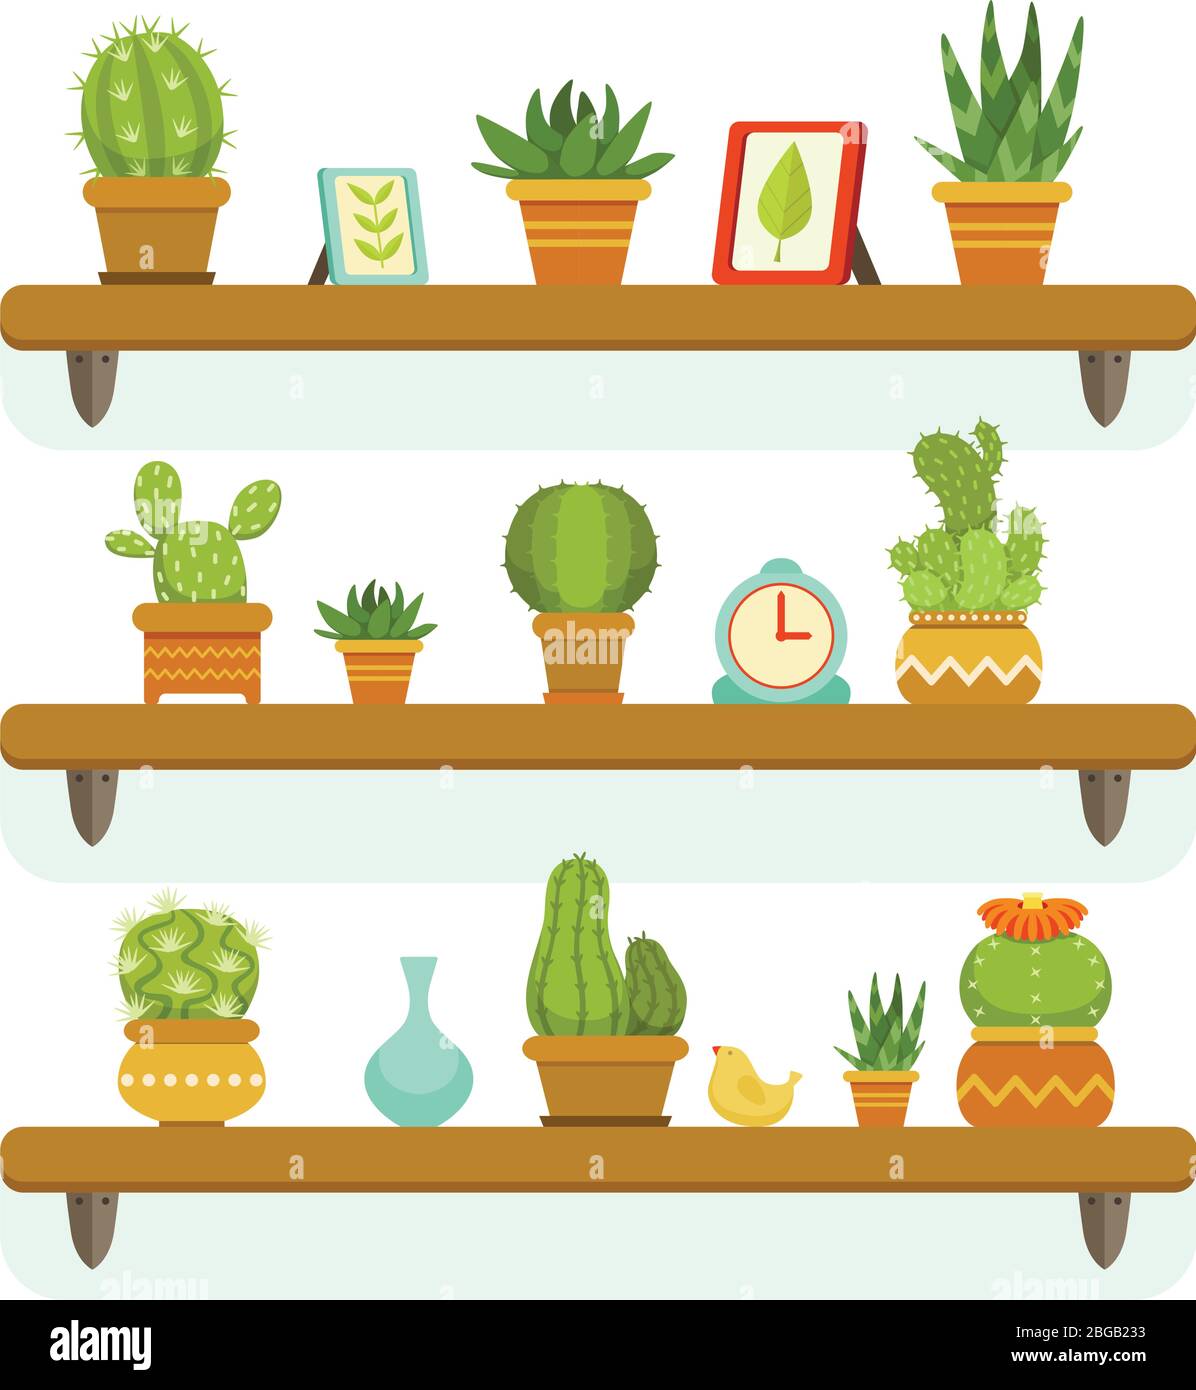 Cactuses in pots stand on the shelves. Decorative plants set isolate on white background. Vector illustrations set Stock Vector